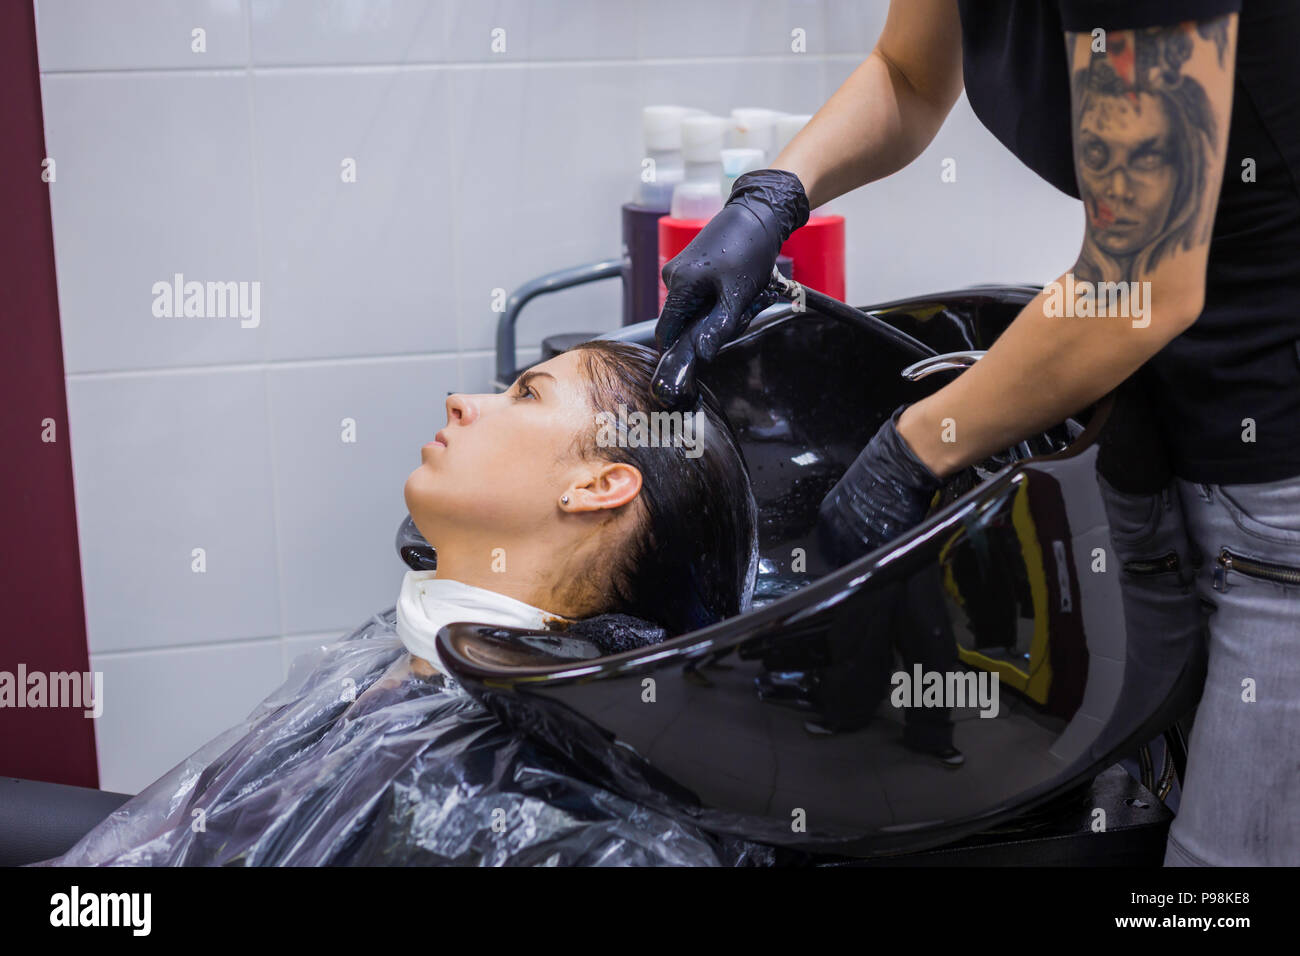 Hairdresser washing hair of woman client Stock Photo